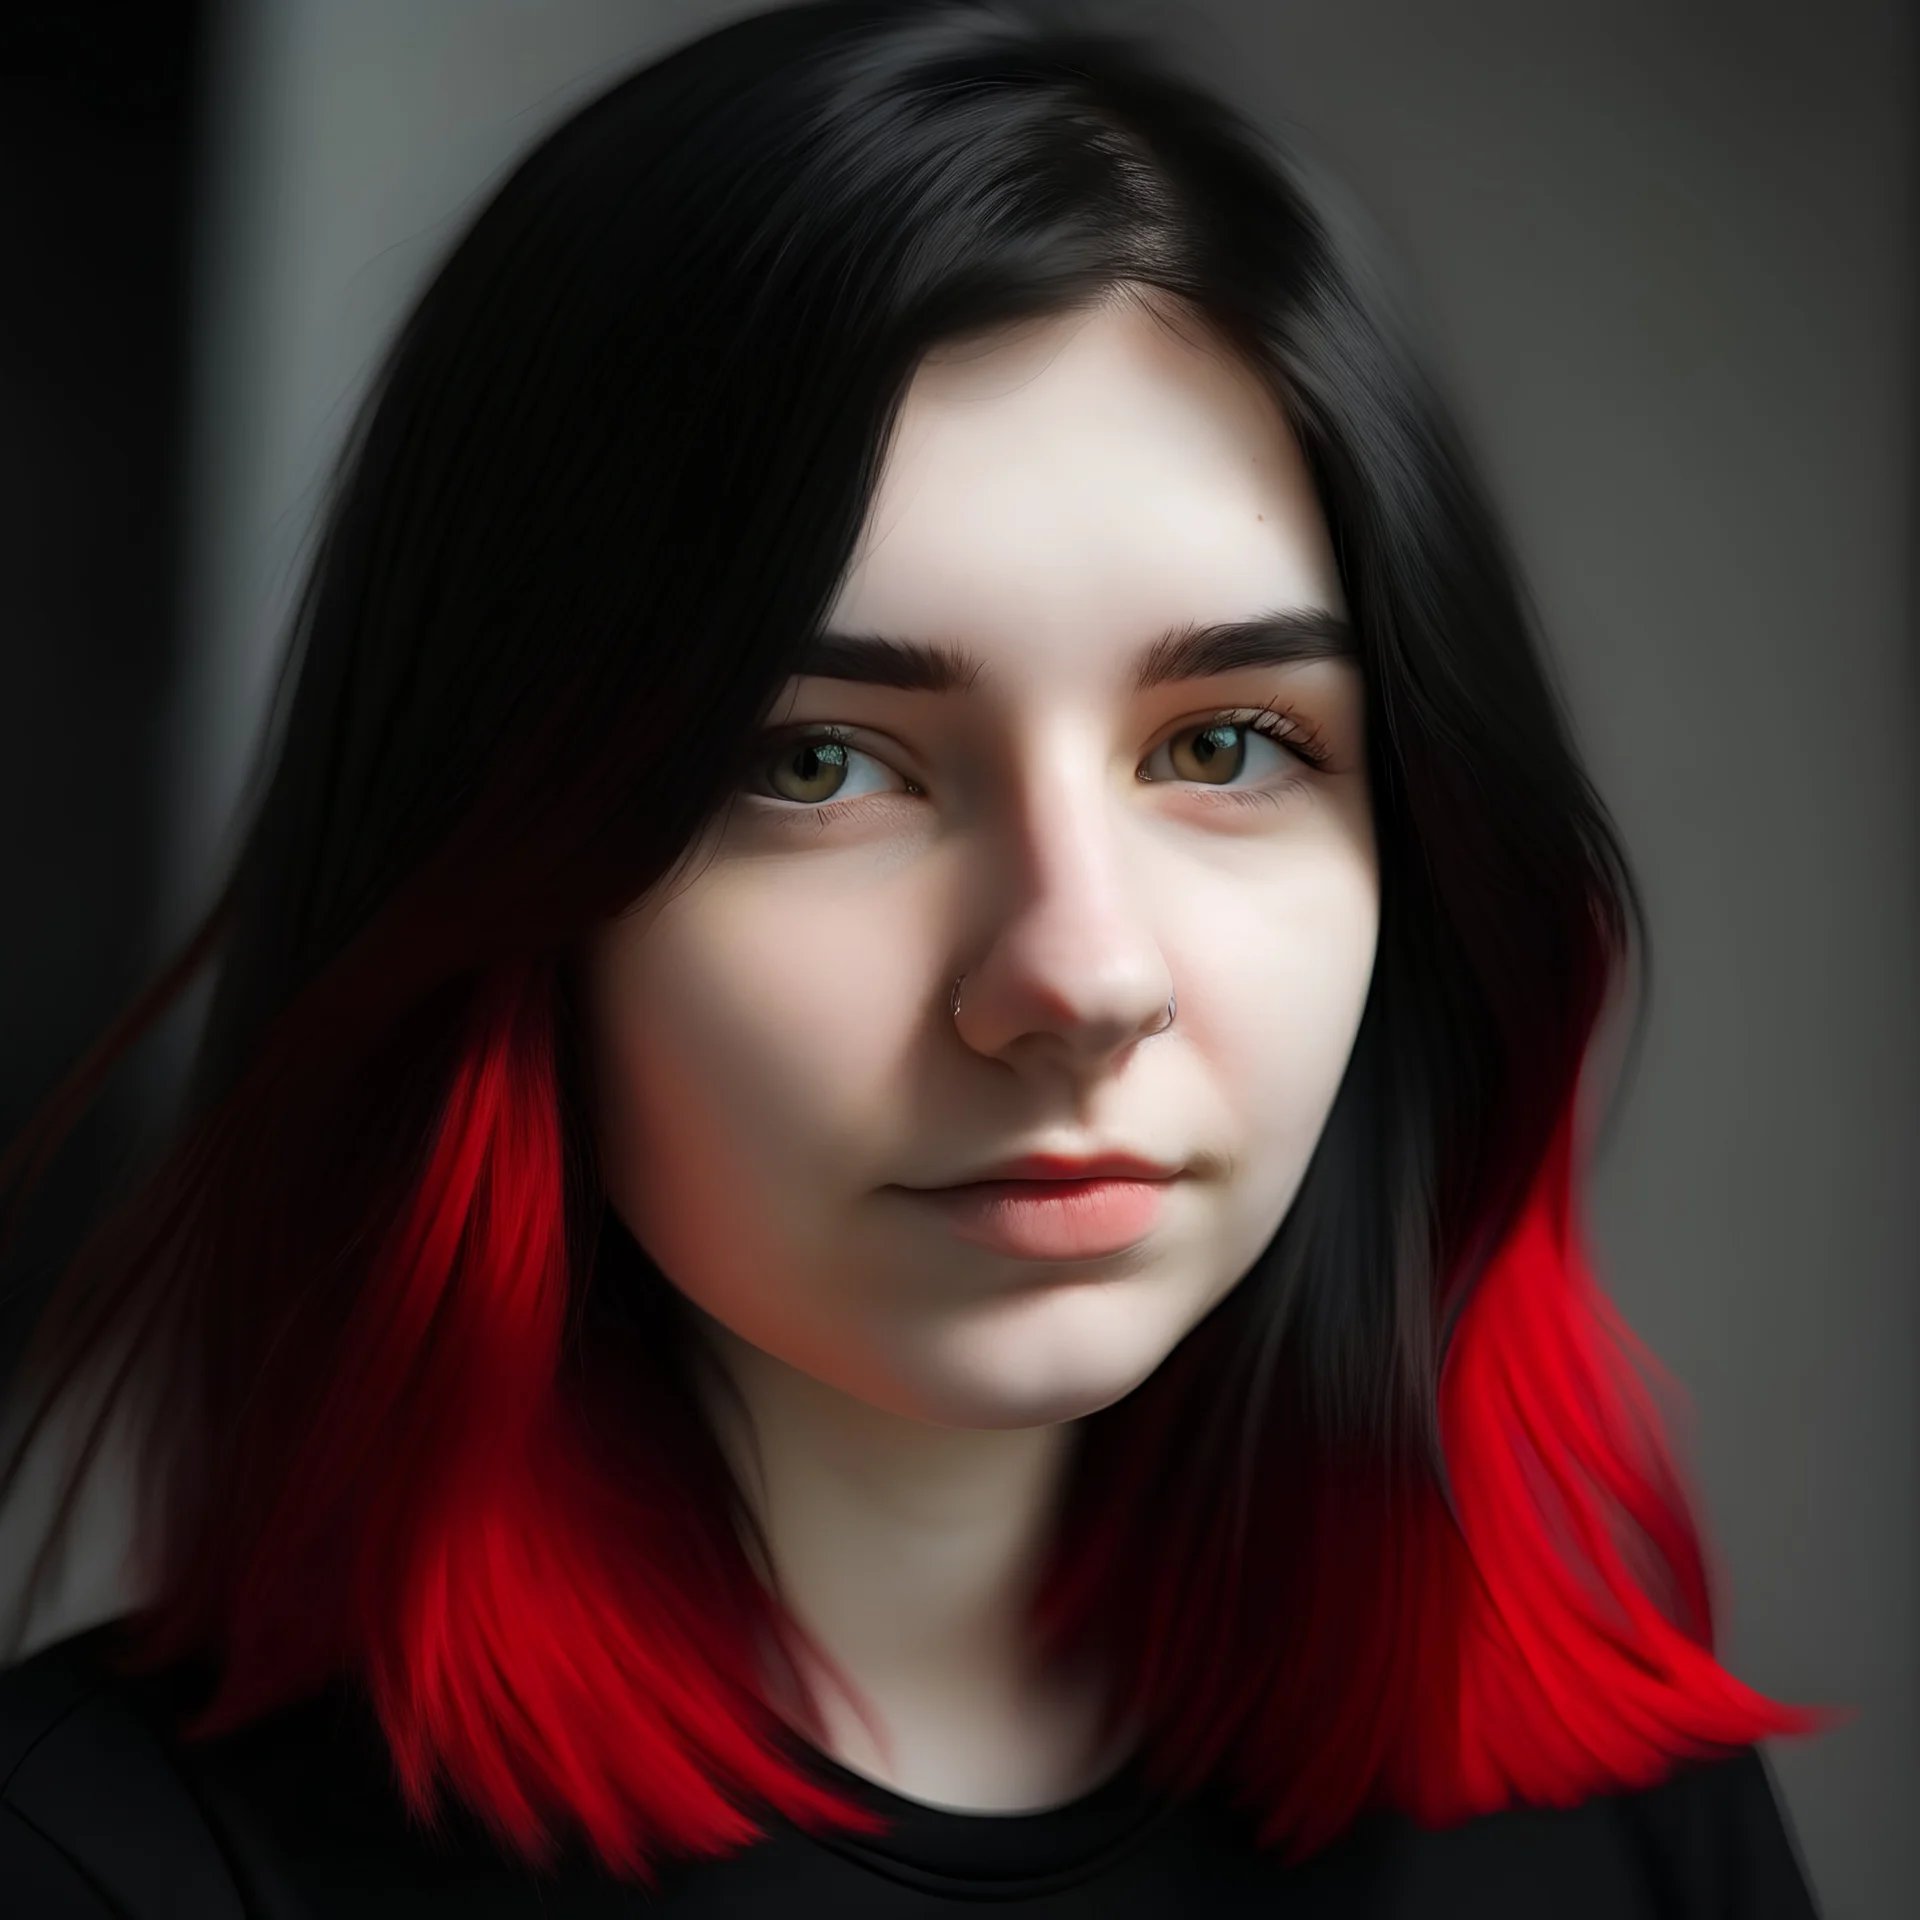 A portrait of a 25-year-old girl, who has black hair with red ends.